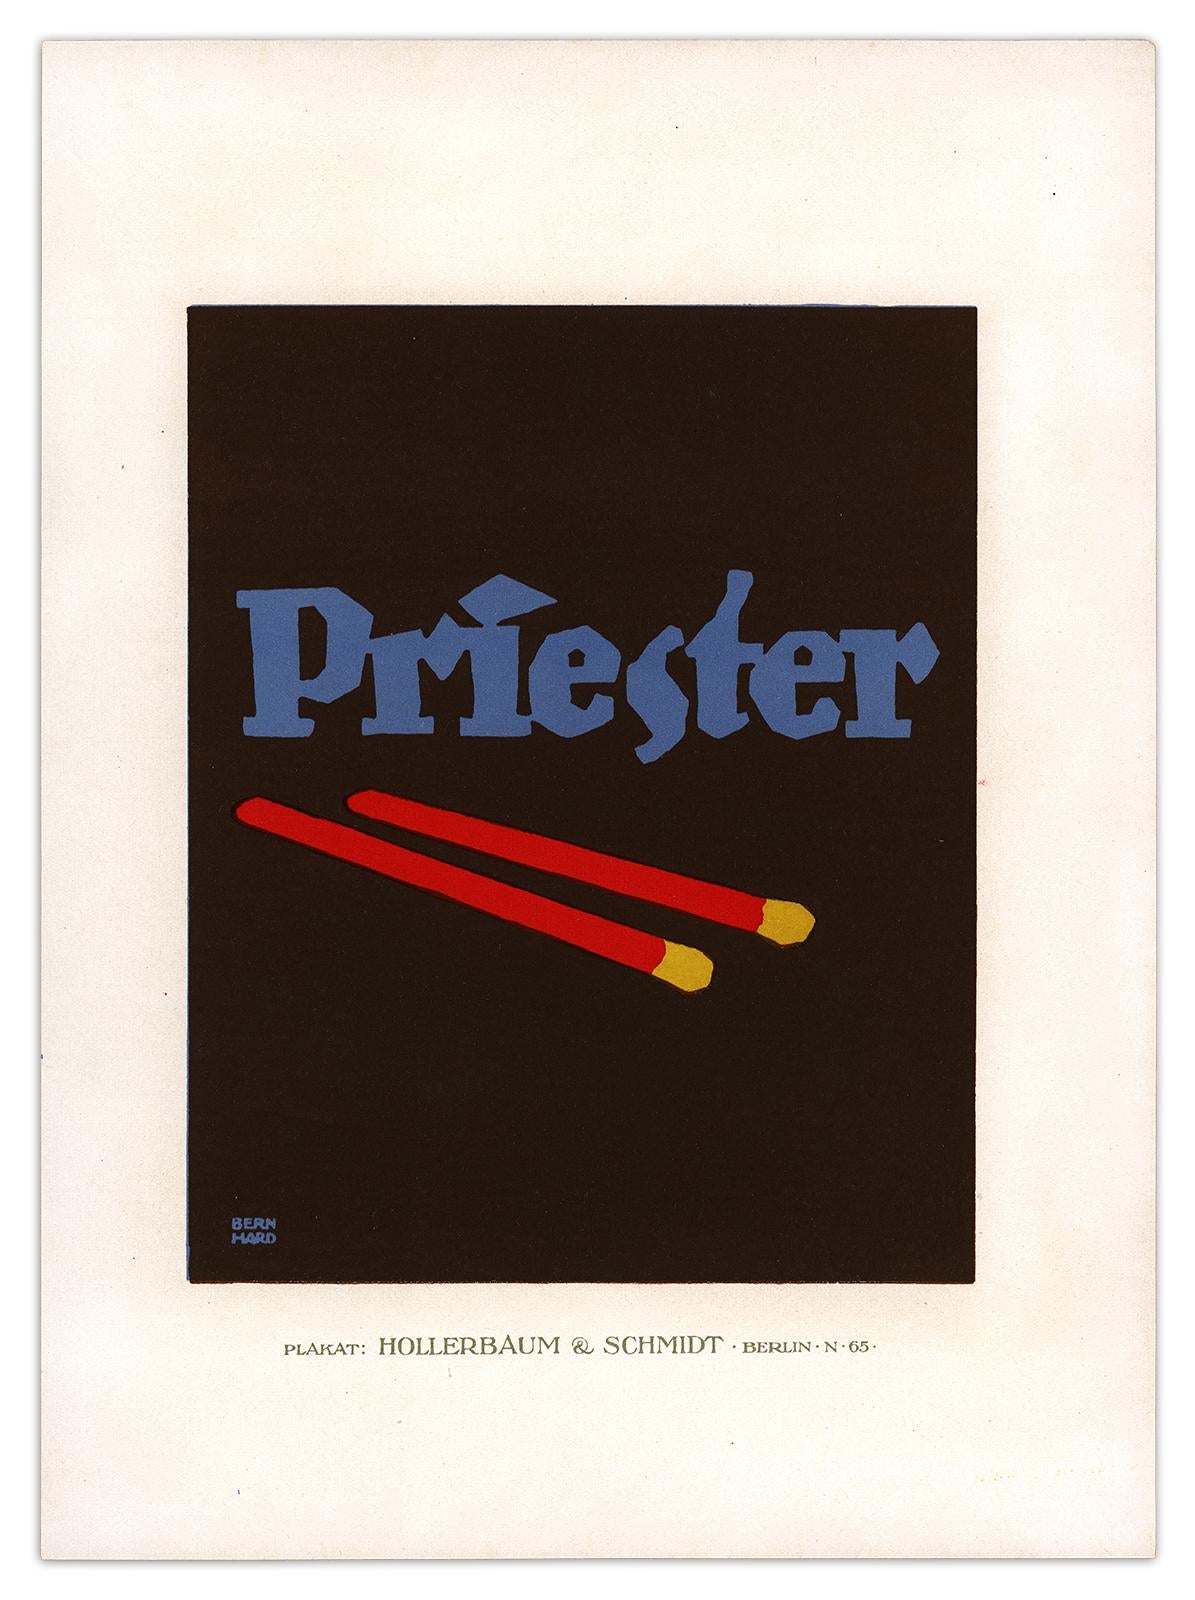 priester matches poster